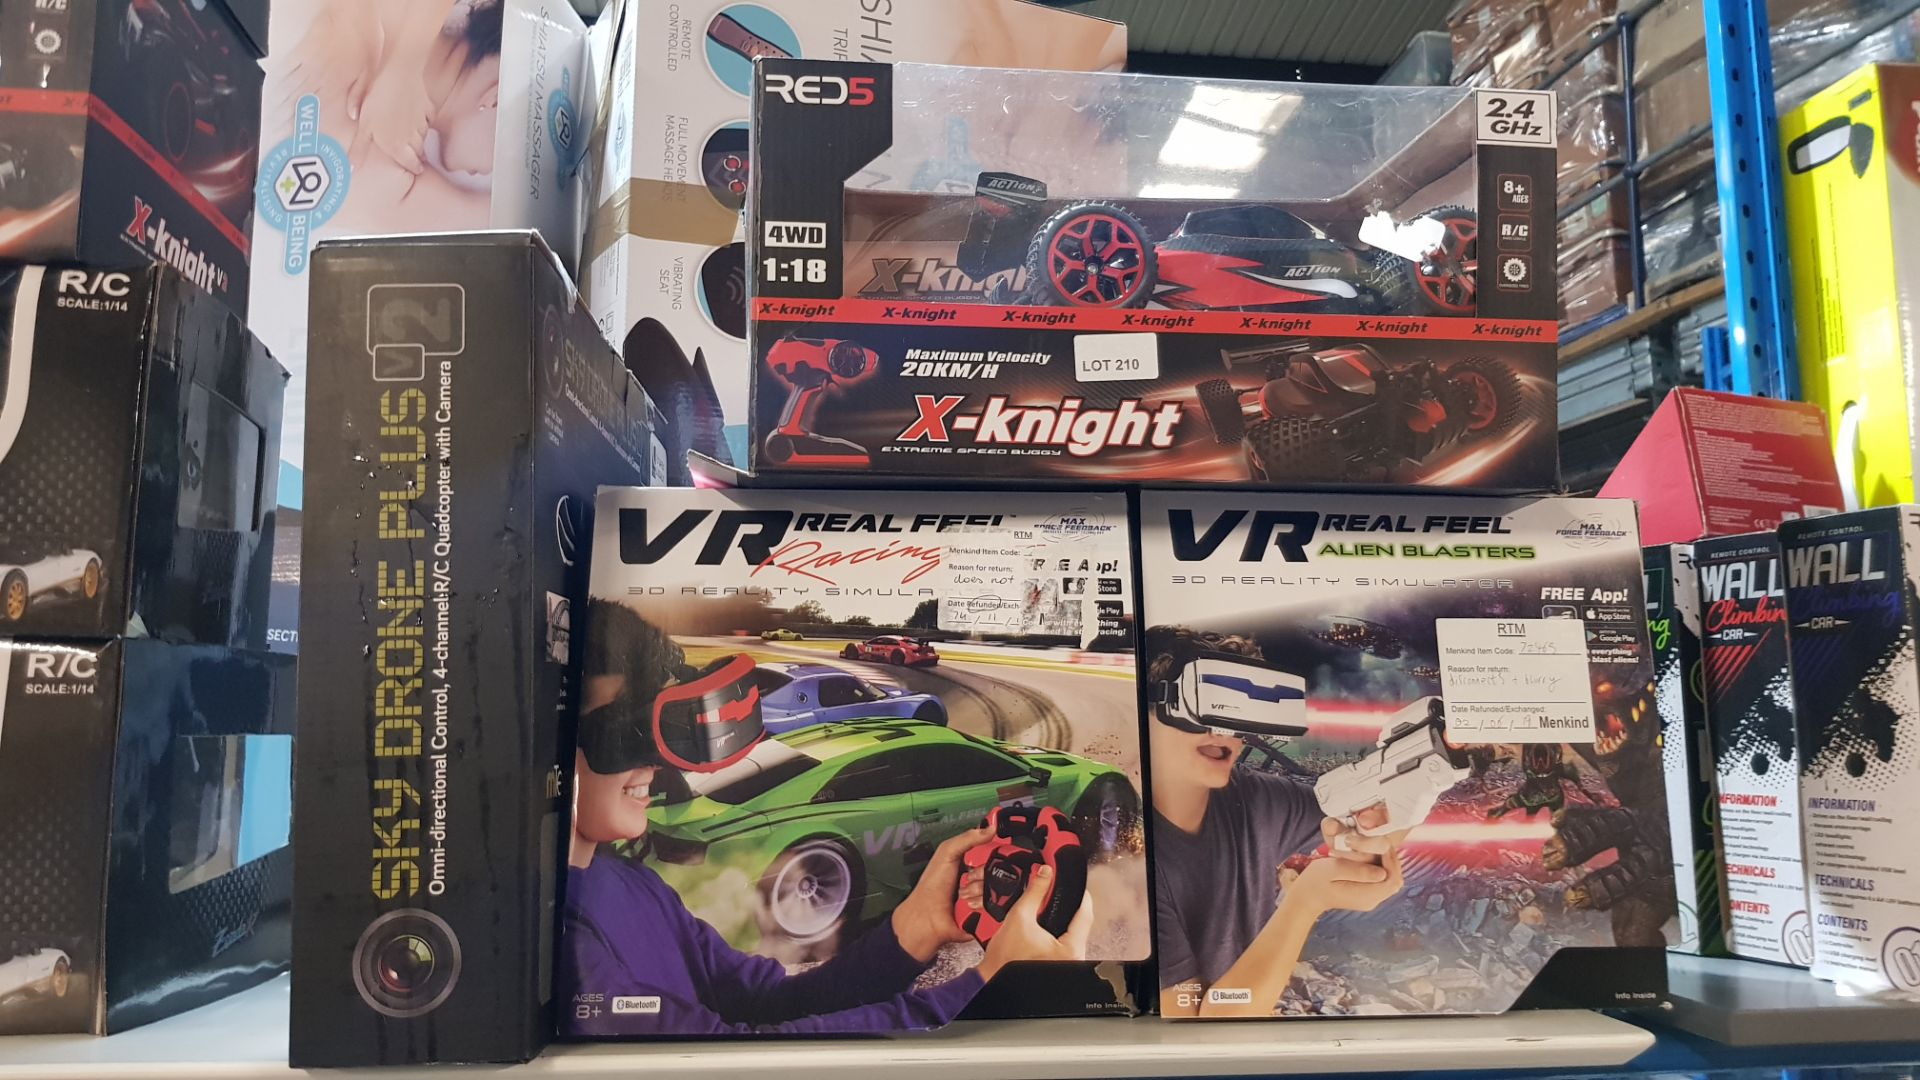 (R1B) Toys. 4 Items. 1 X MTech Sky Drone Plus, 1 X Red5 X Knight Extreme Speed Buggy. 1 X VR Real